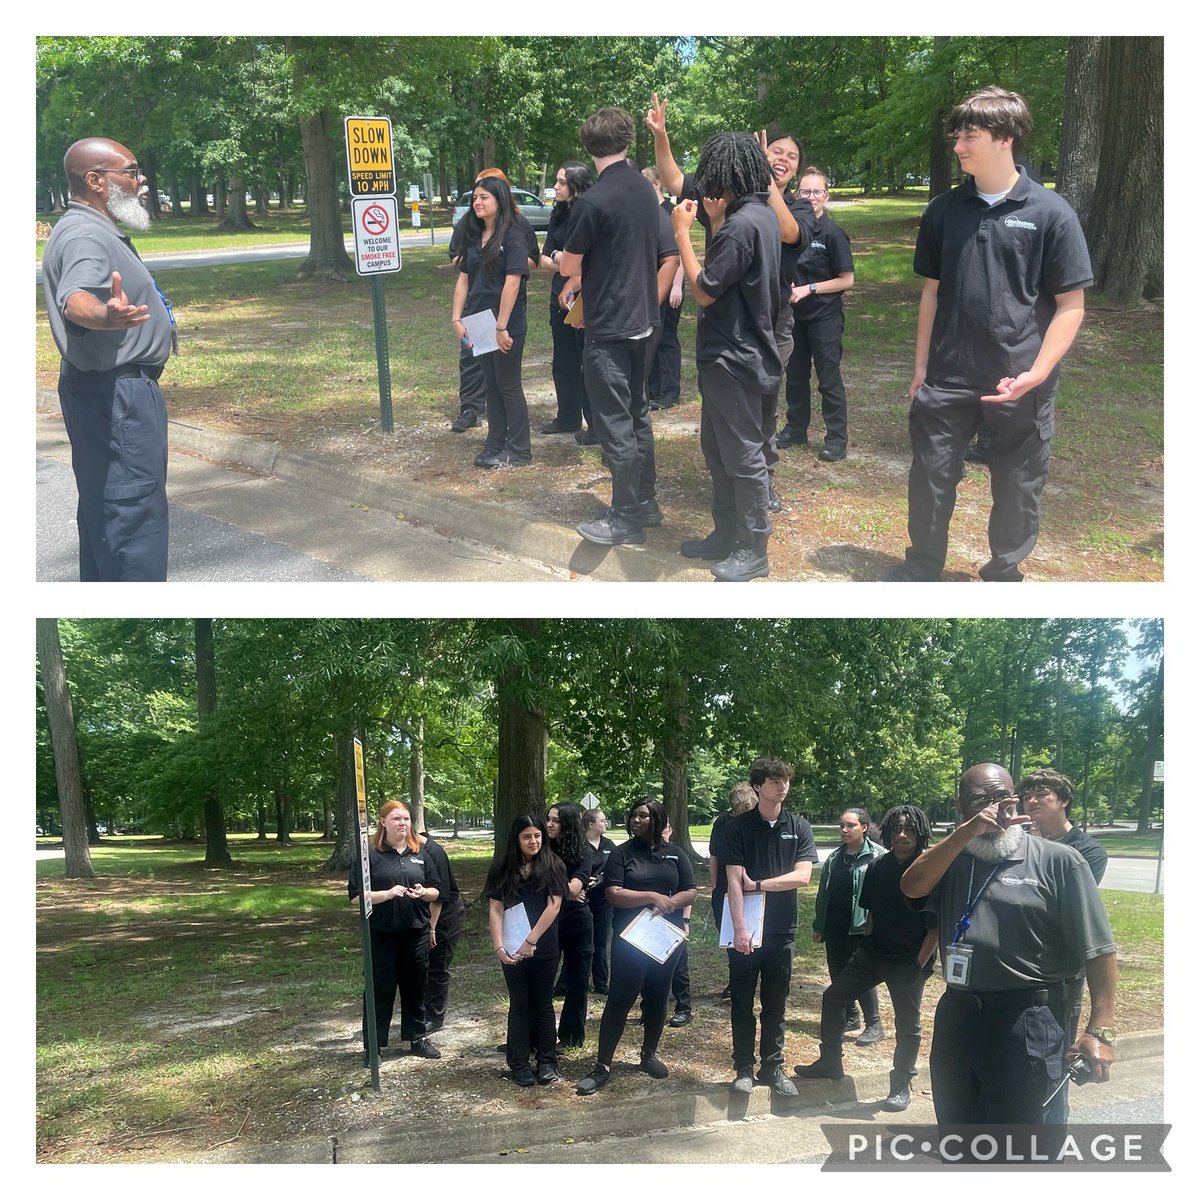 #CriminalJustice students taking campus safety to the next level! Studying signage & applying their #expertise to suggest #improvements for a #safer environment for everyone. Empowering our future protectors! #GettinItDone #SkillsMatter #NHRECCTE #LeadBoldly @NHREC_VA